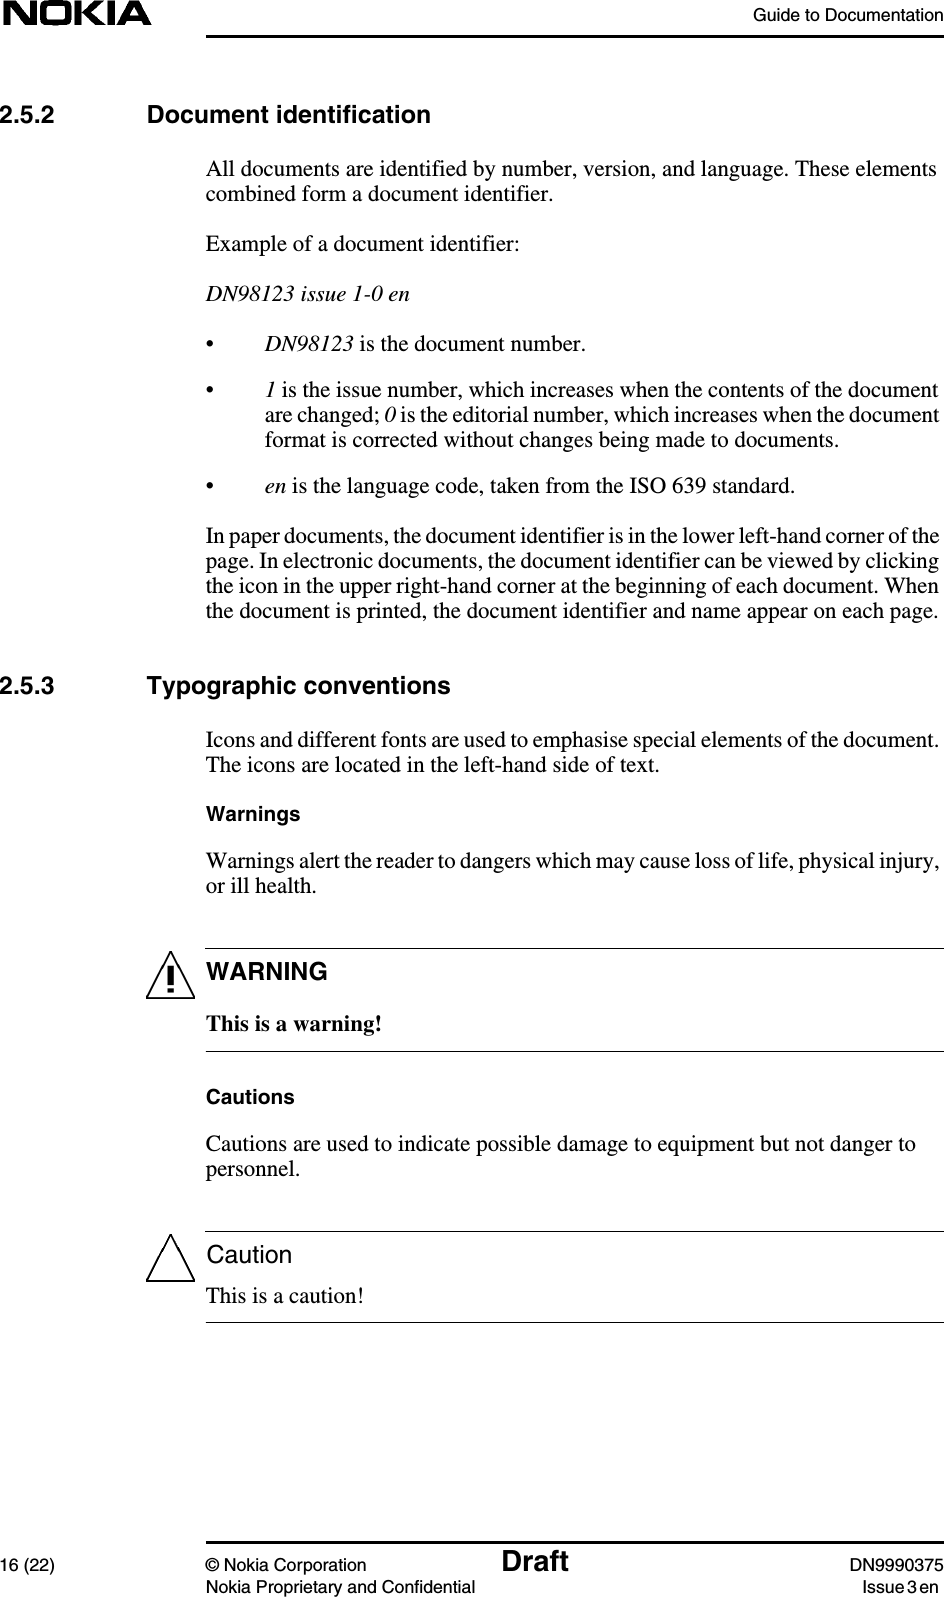 Guide to Documentation16 (22) © Nokia Corporation Draft DN9990375Nokia Proprietary and Confidential Issue 3 enWARNINGCaution2.5.2 Document identificationAll documents are identified by number, version, and language. These elementscombined form a document identifier.Example of a document identifier:DN98123 issue 1-0 en•DN98123 is the document number.•1is the issue number, which increases when the contents of the documentare changed; 0is the editorial number, which increases when the documentformat is corrected without changes being made to documents.•en is the language code, taken from the ISO 639 standard.In paper documents, the document identifier is in the lower left-hand corner of thepage. In electronic documents, the document identifier can be viewed by clickingthe icon in the upper right-hand corner at the beginning of each document. Whenthe document is printed, the document identifier and name appear on each page.2.5.3 Typographic conventionsIcons and different fonts are used to emphasise special elements of the document.The icons are located in the left-hand side of text.WarningsWarnings alert the reader to dangers which may cause loss of life, physical injury,or ill health.This is a warning!CautionsCautions are used to indicate possible damage to equipment but not danger topersonnel.This is a caution!